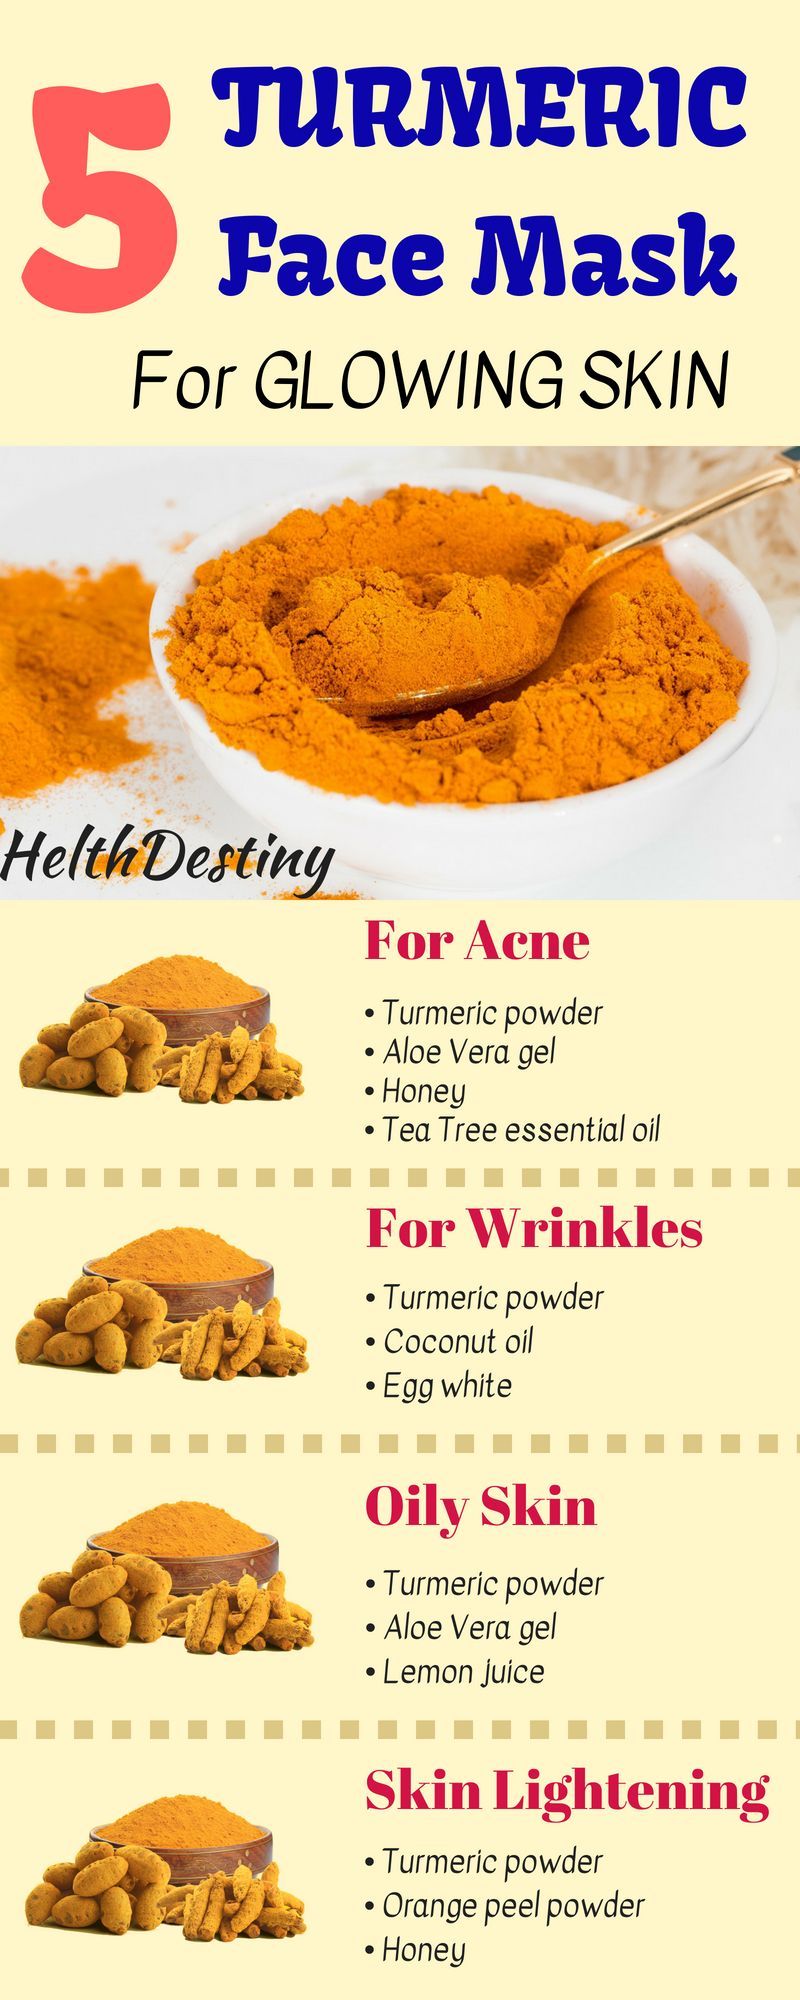 Turmeric Face Mask for Beautiful and Glowing Skin - HelthDestiny - Turmeric Face Mask for Beautiful and Glowing Skin - HelthDestiny -   16 diy Face Mask for scars ideas